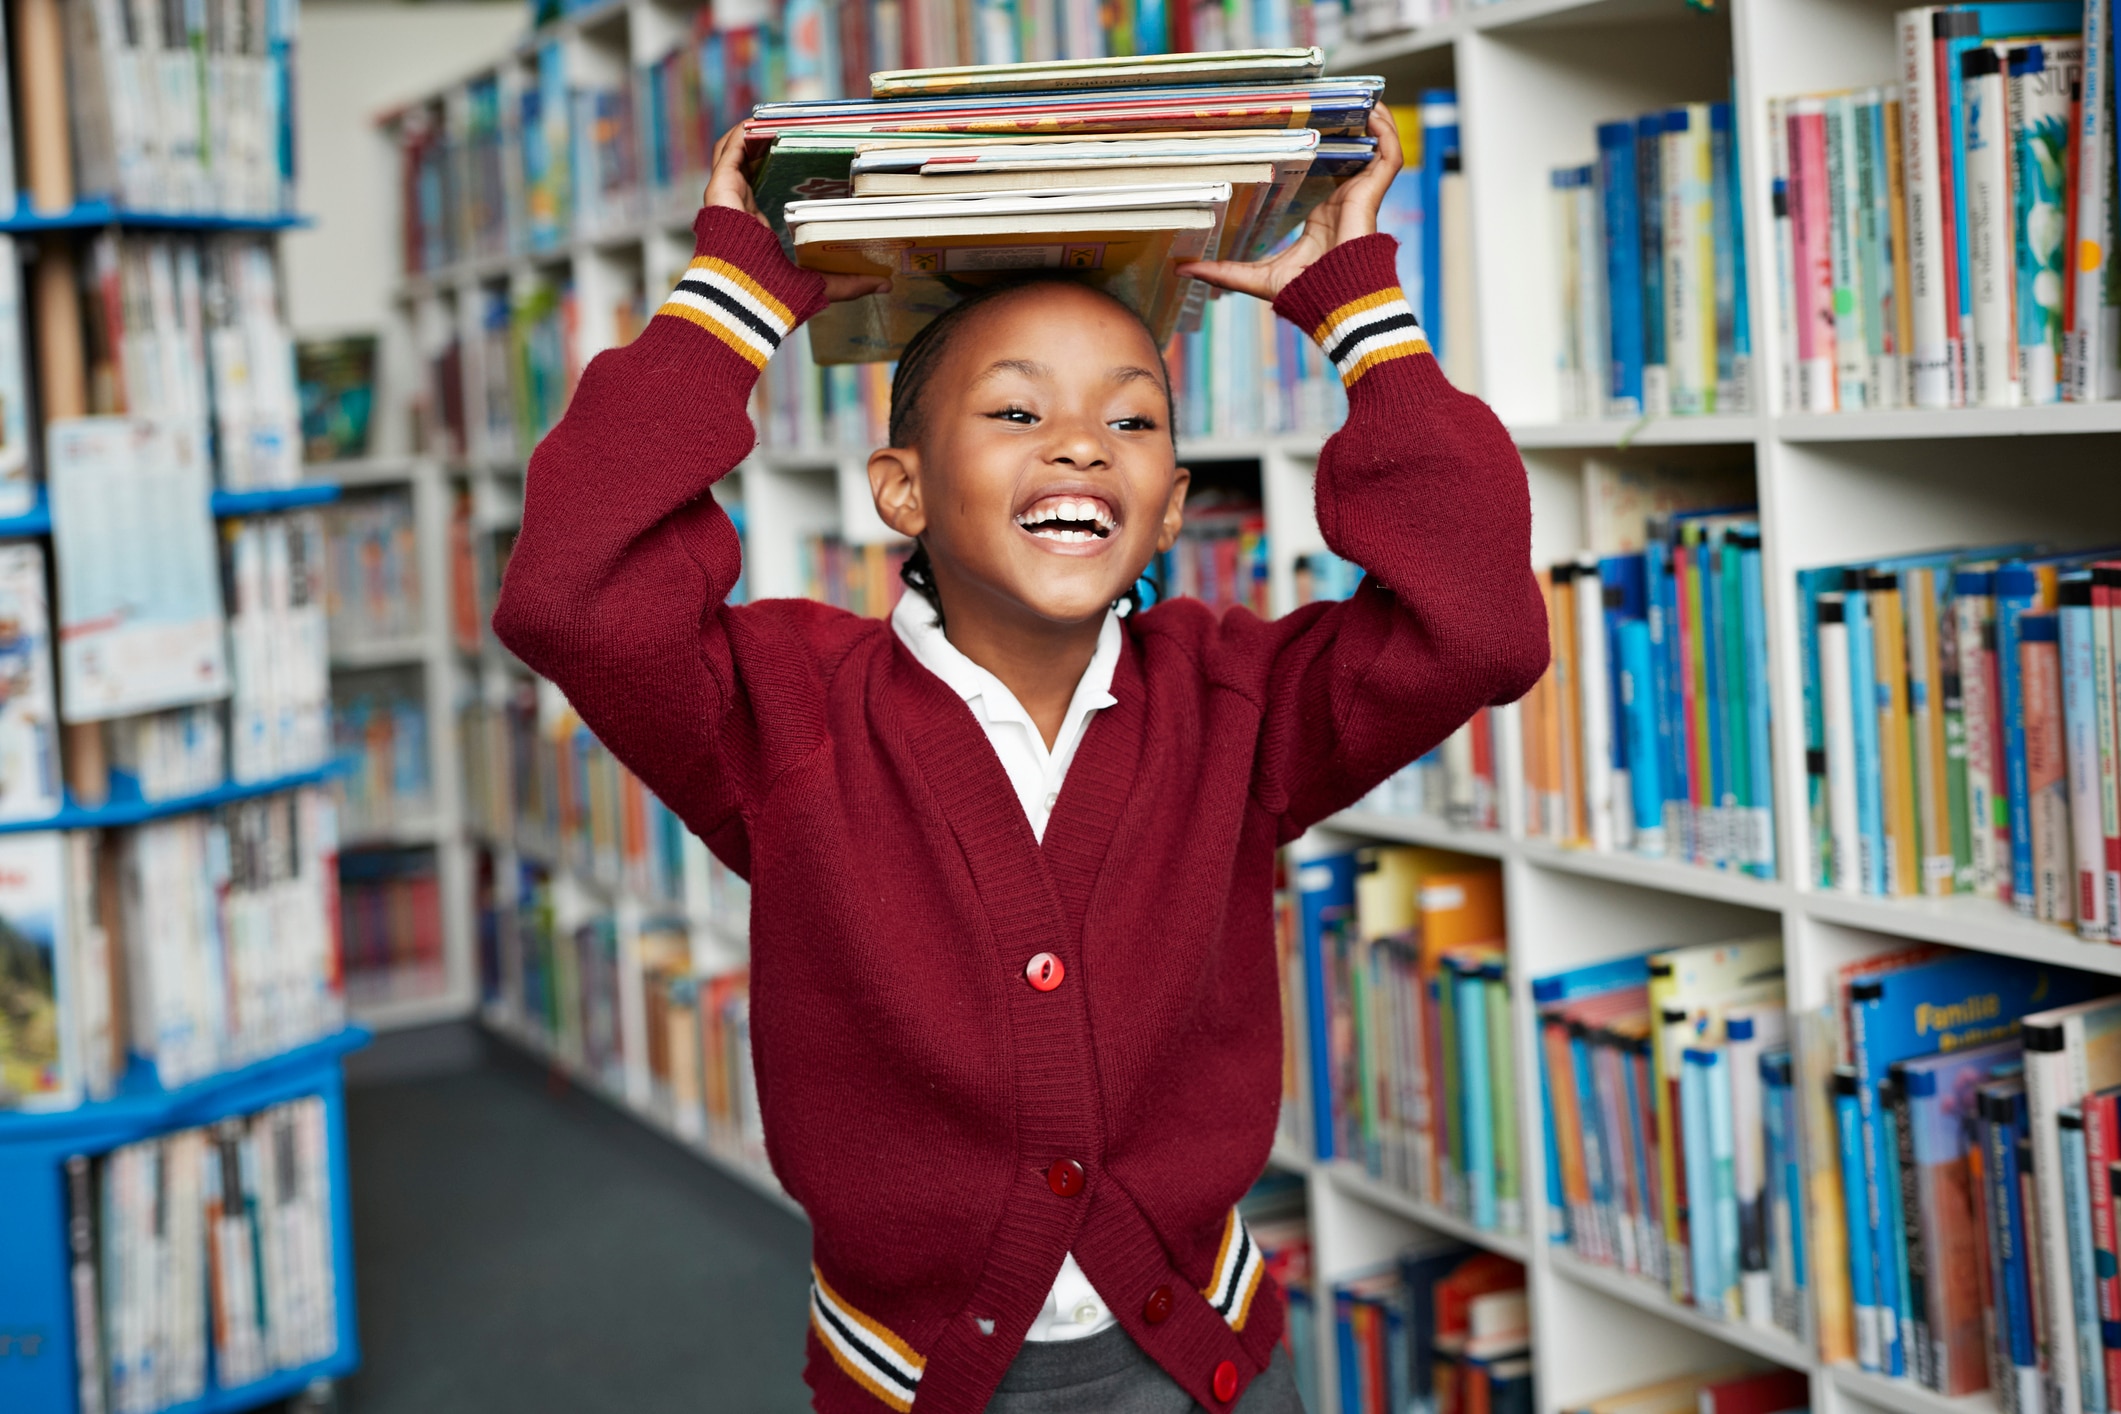 schoolgirl smiling & balancing stack of books on the head at library